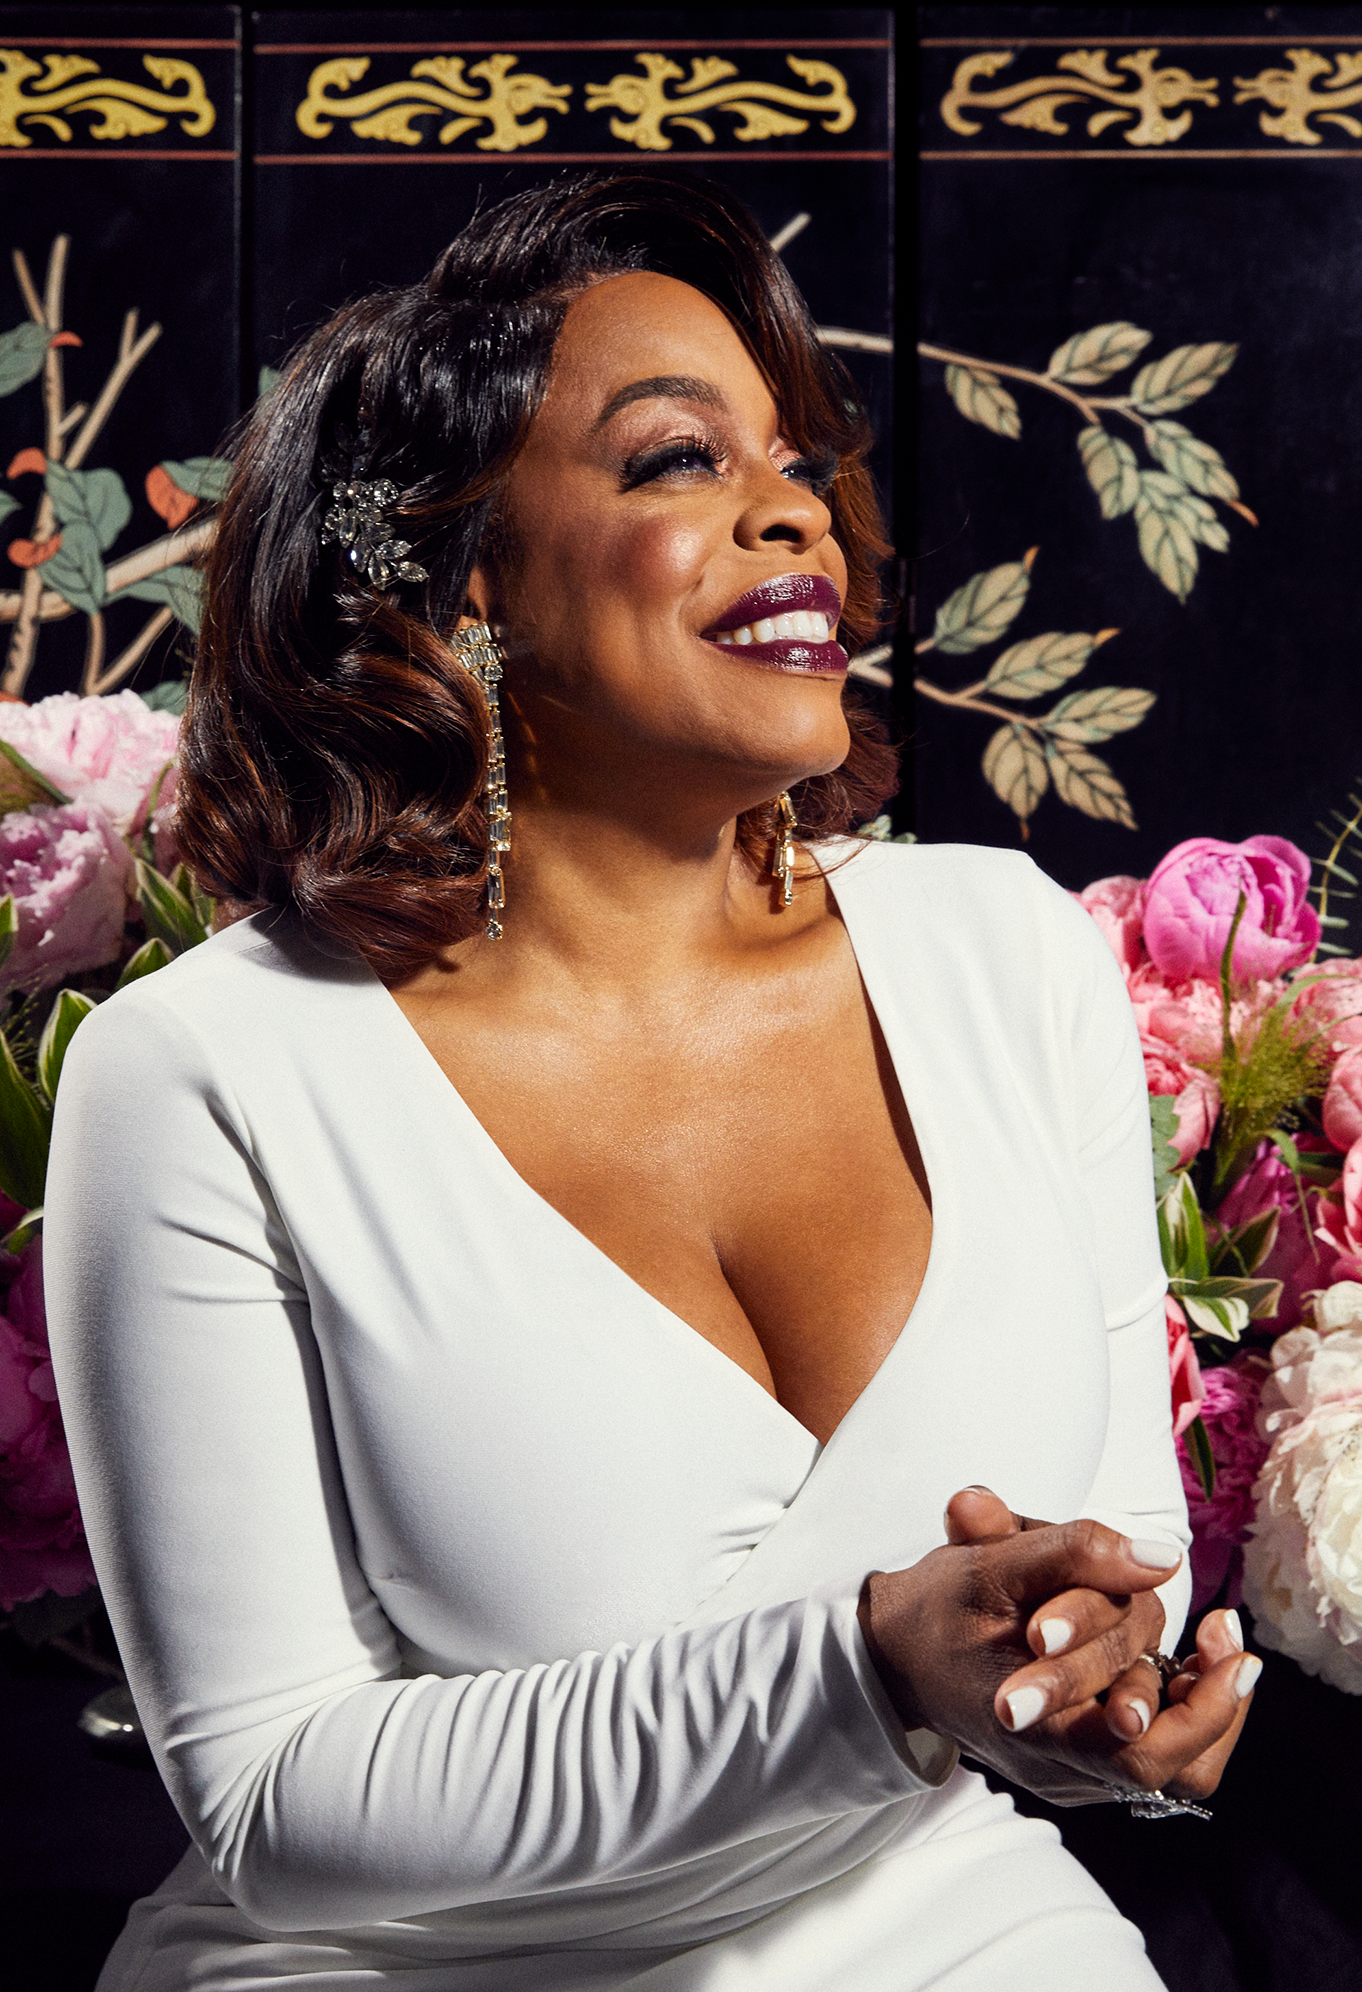 Niecy Nash Jokes Mom Didn't Believe in Her Acting at Critics Choice